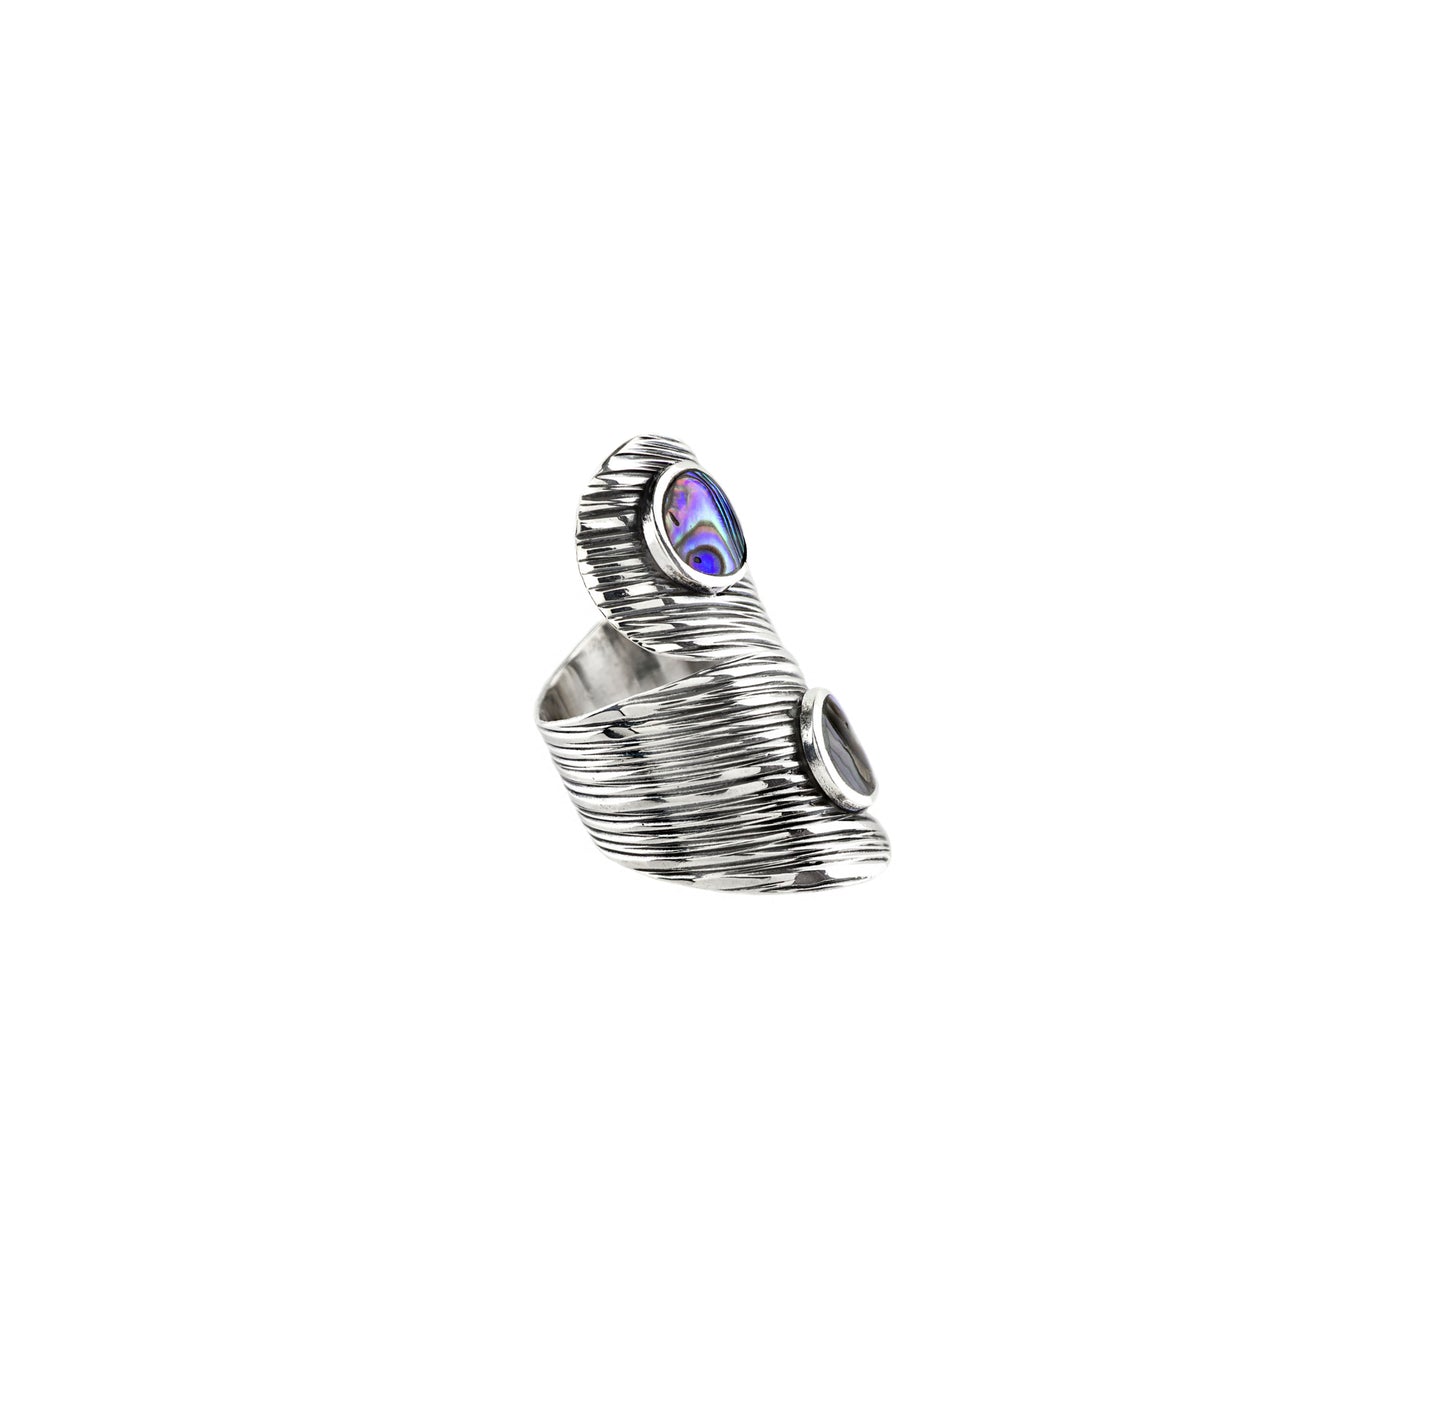 Abalone Shell Sterling Silver Wrap Ring - Twisted Earth Artistry